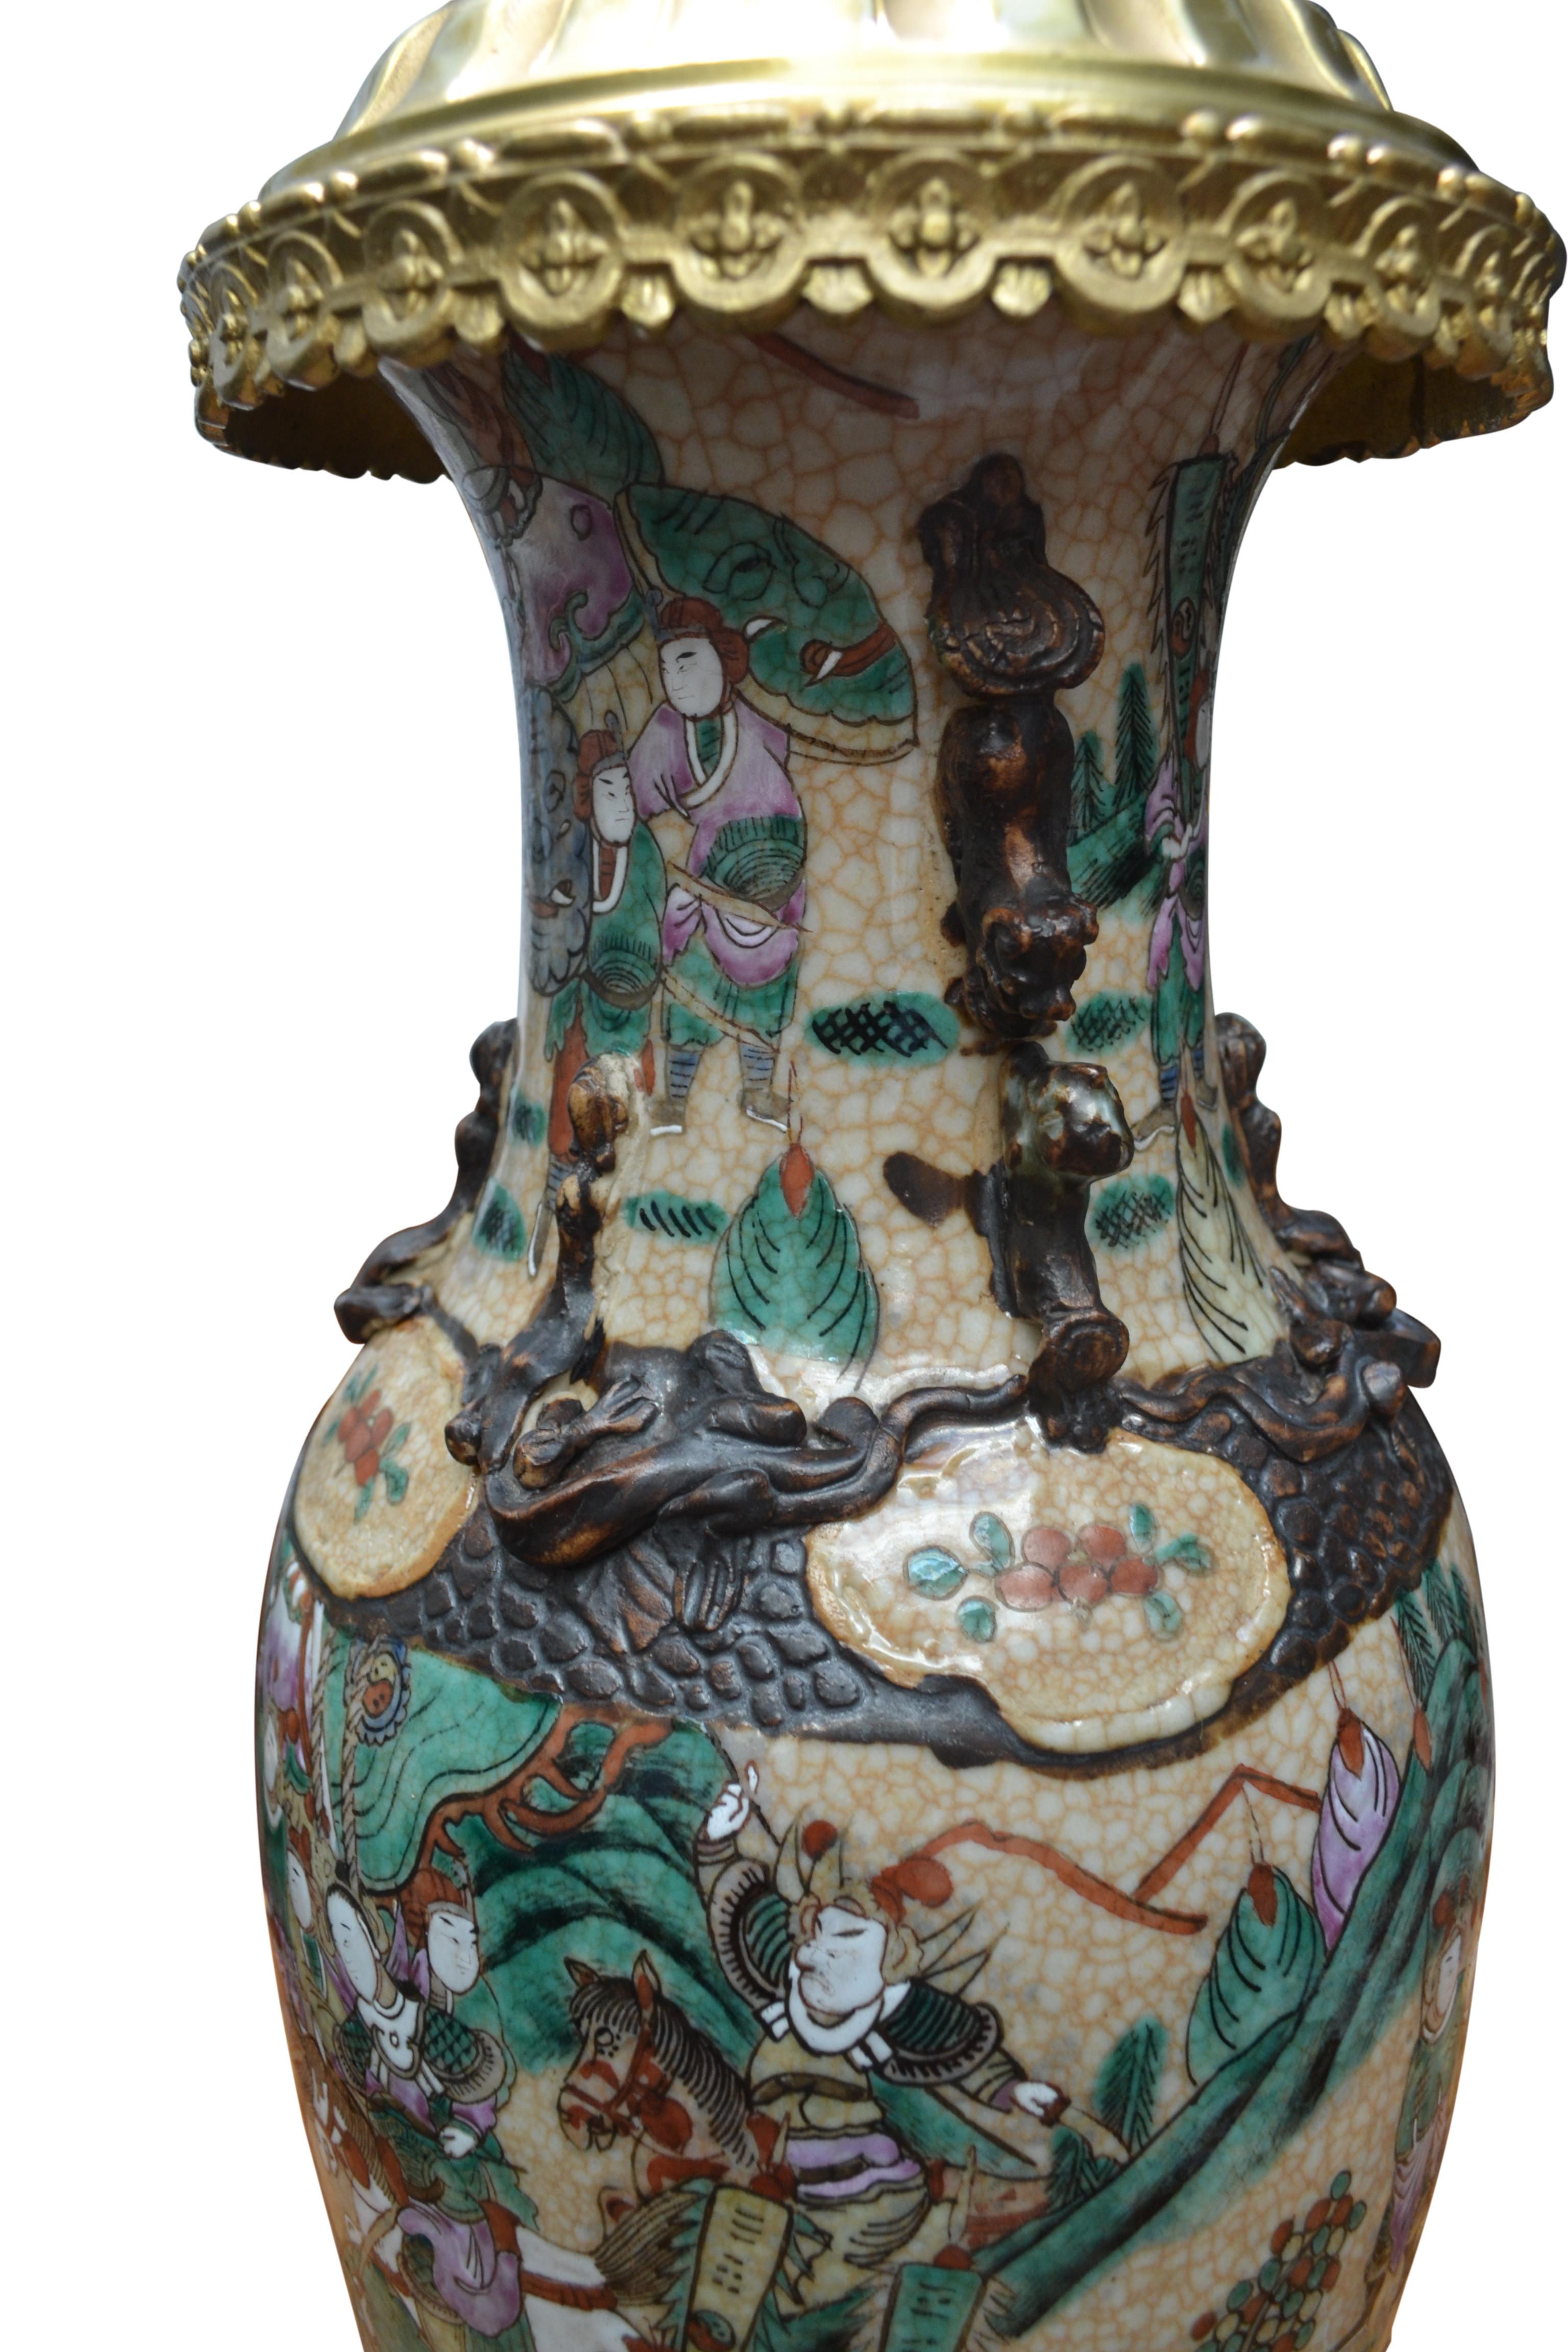  A 19 Century Nanking Porcelain Vase on an Ormolu base turned into a Lamp In Good Condition For Sale In Vancouver, British Columbia